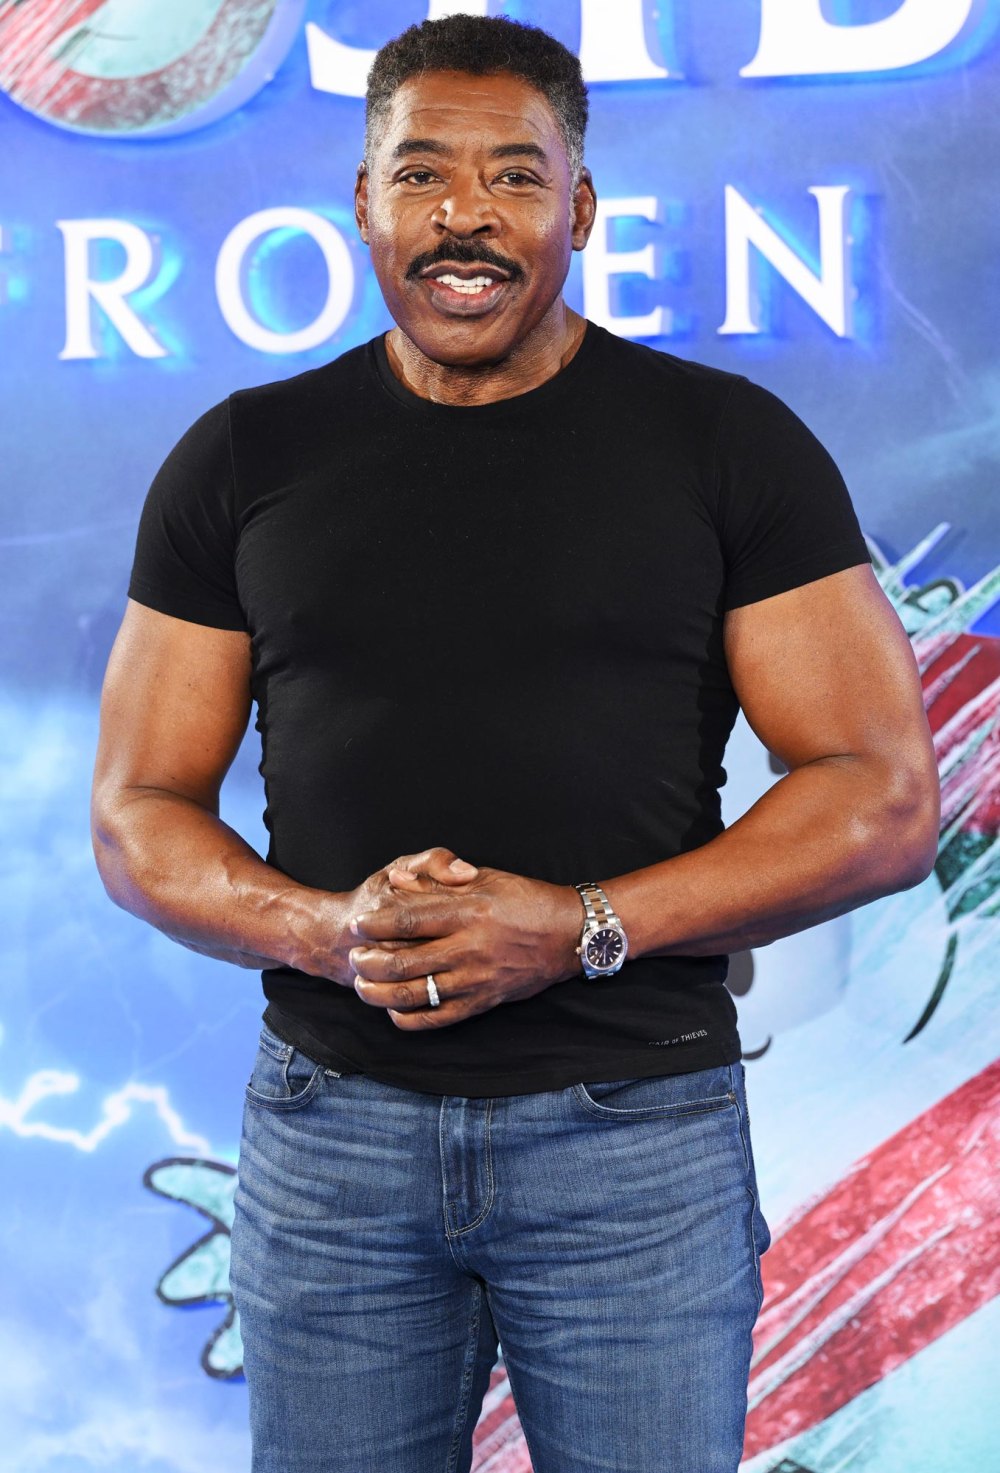 Ernie Hudson Explains Why He Constantly Has to Work Job to Job After 60 Years of Acting